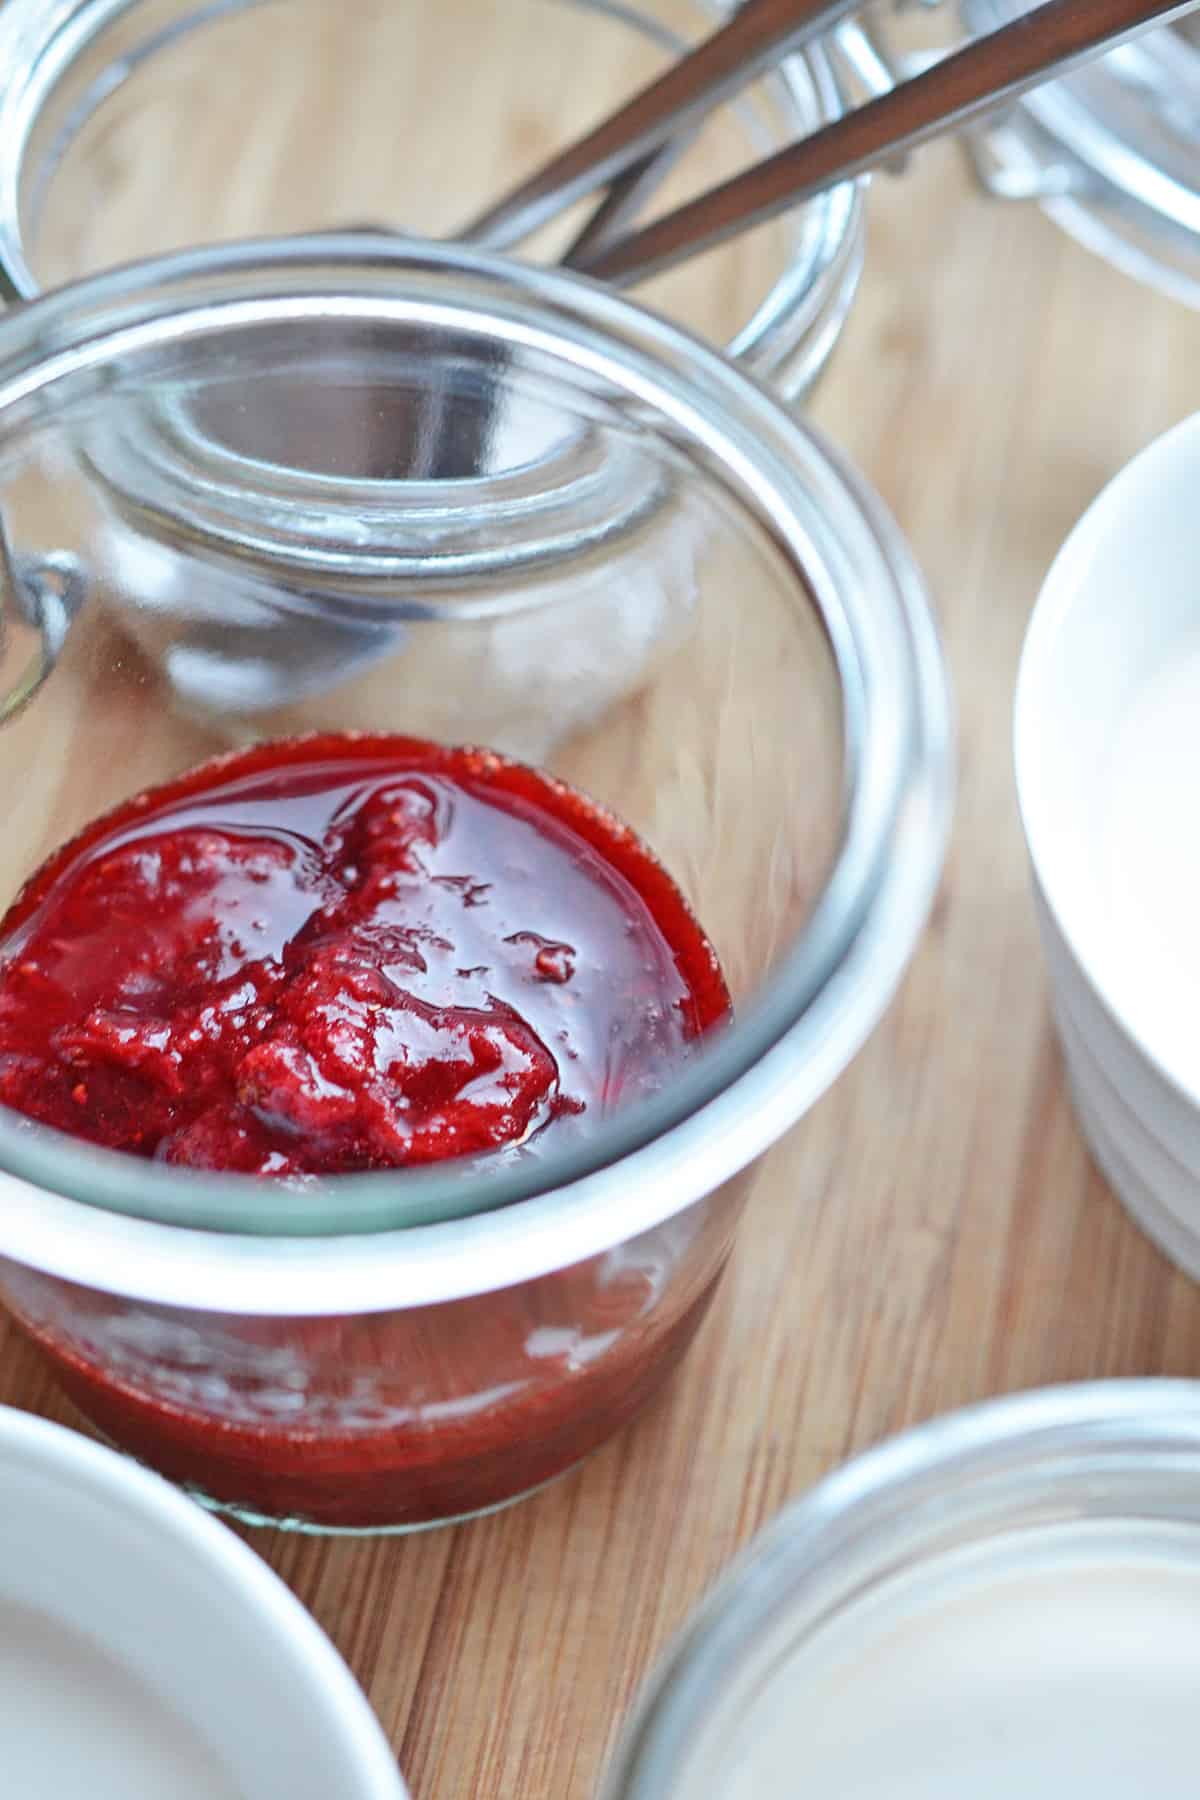 A closeup shot of a jar of homemade strawberry compote next to ramekins filled with Panna Cotta.